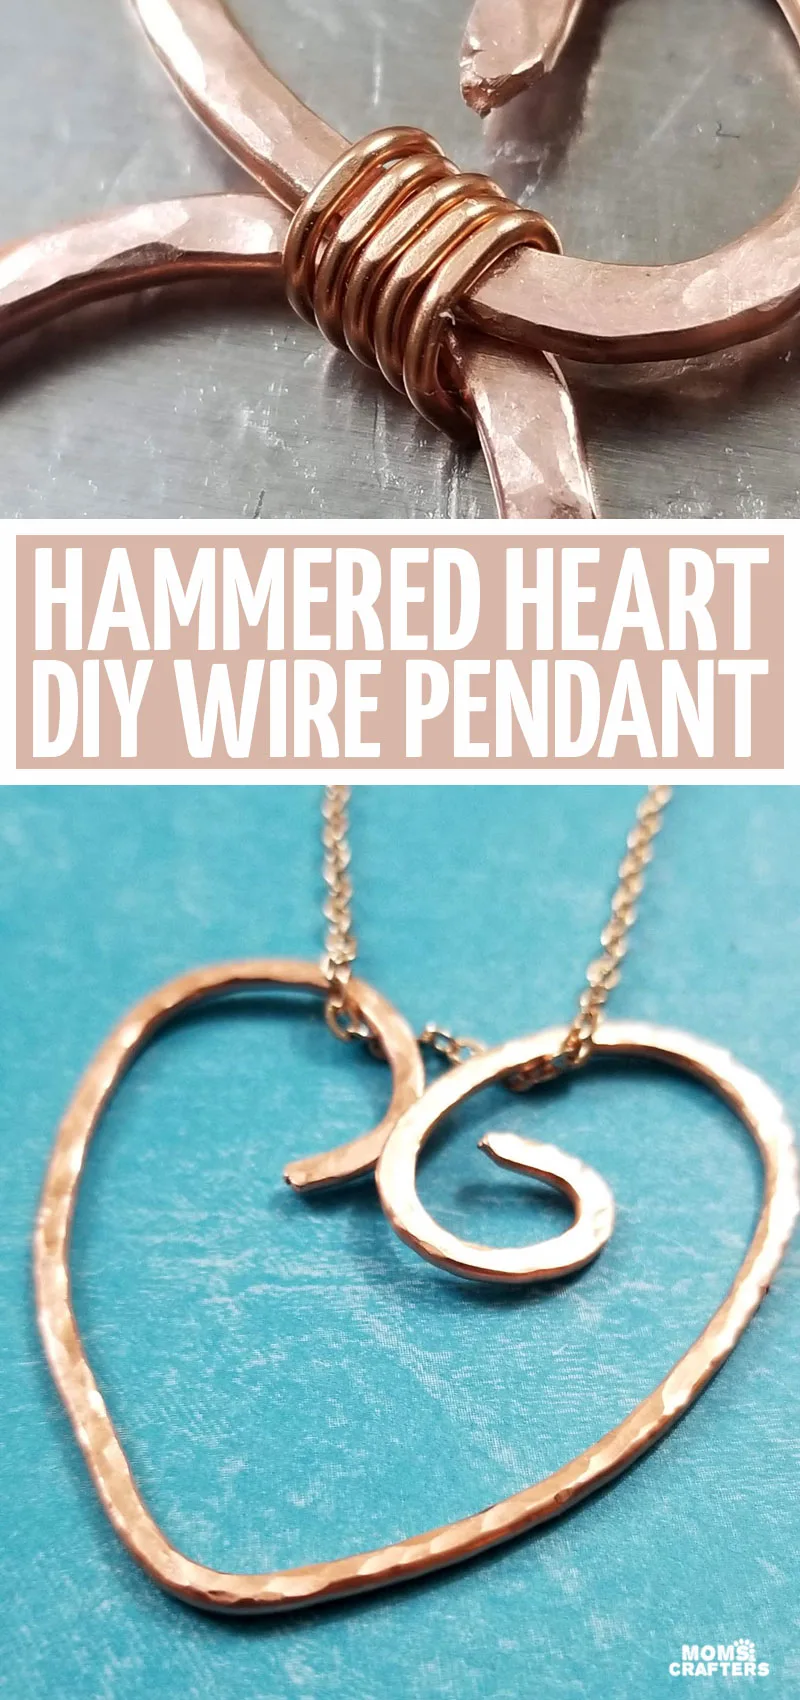 Learn how to make an easy wire heart pendant tutorial metal jewelry for beginners! This jewelry making project is easy and you can amke it as a keychain as well for a great gift for men! Learn how to make copper wire jewelry without soldering.